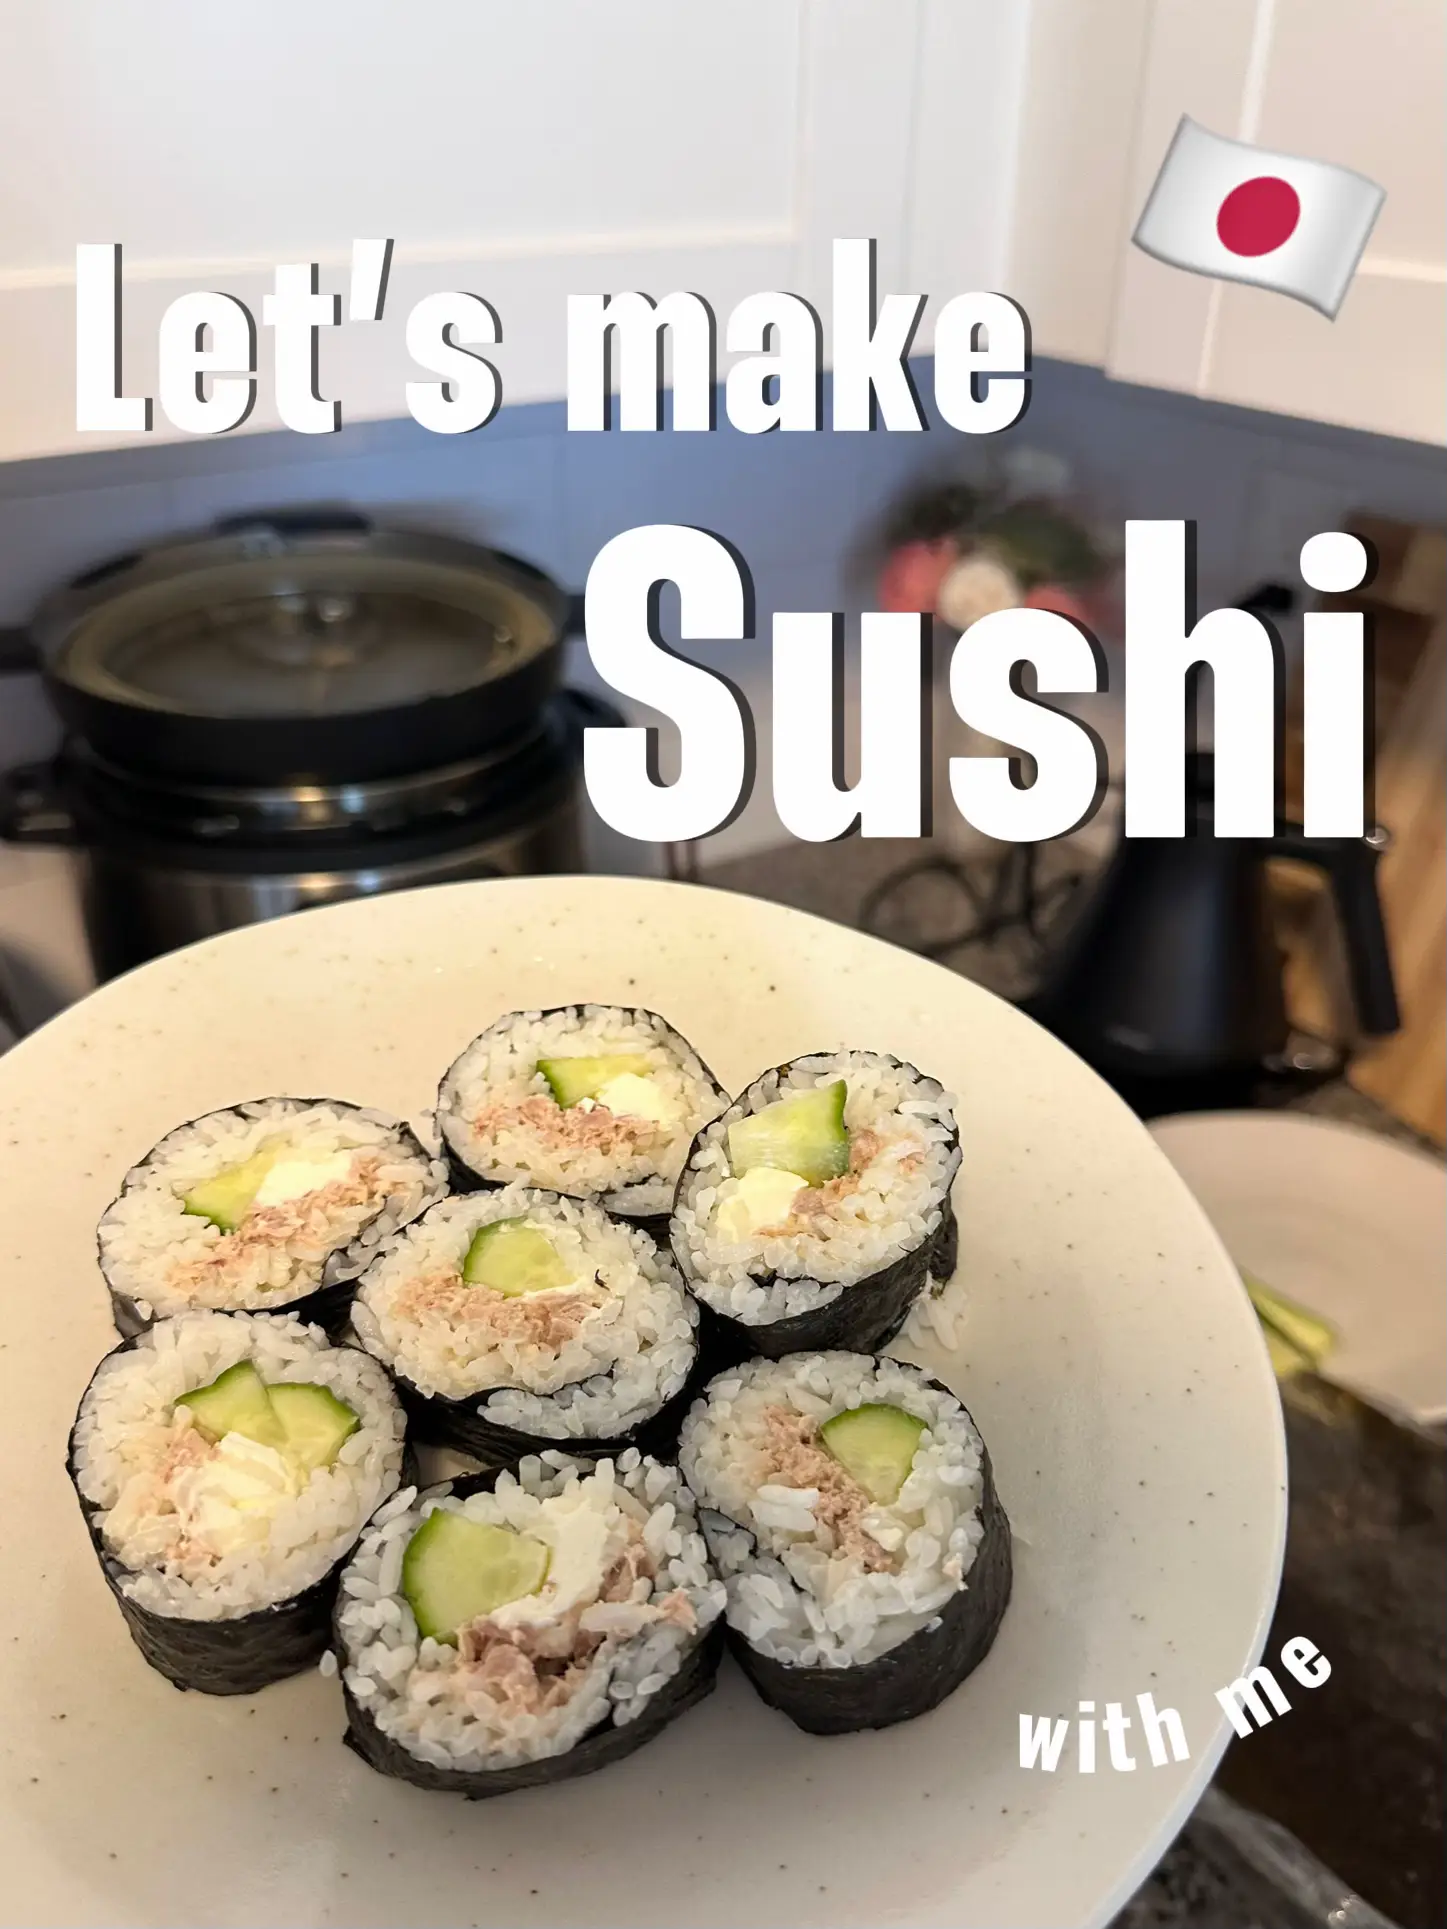 Let’s make sushi with me🇯🇵's images